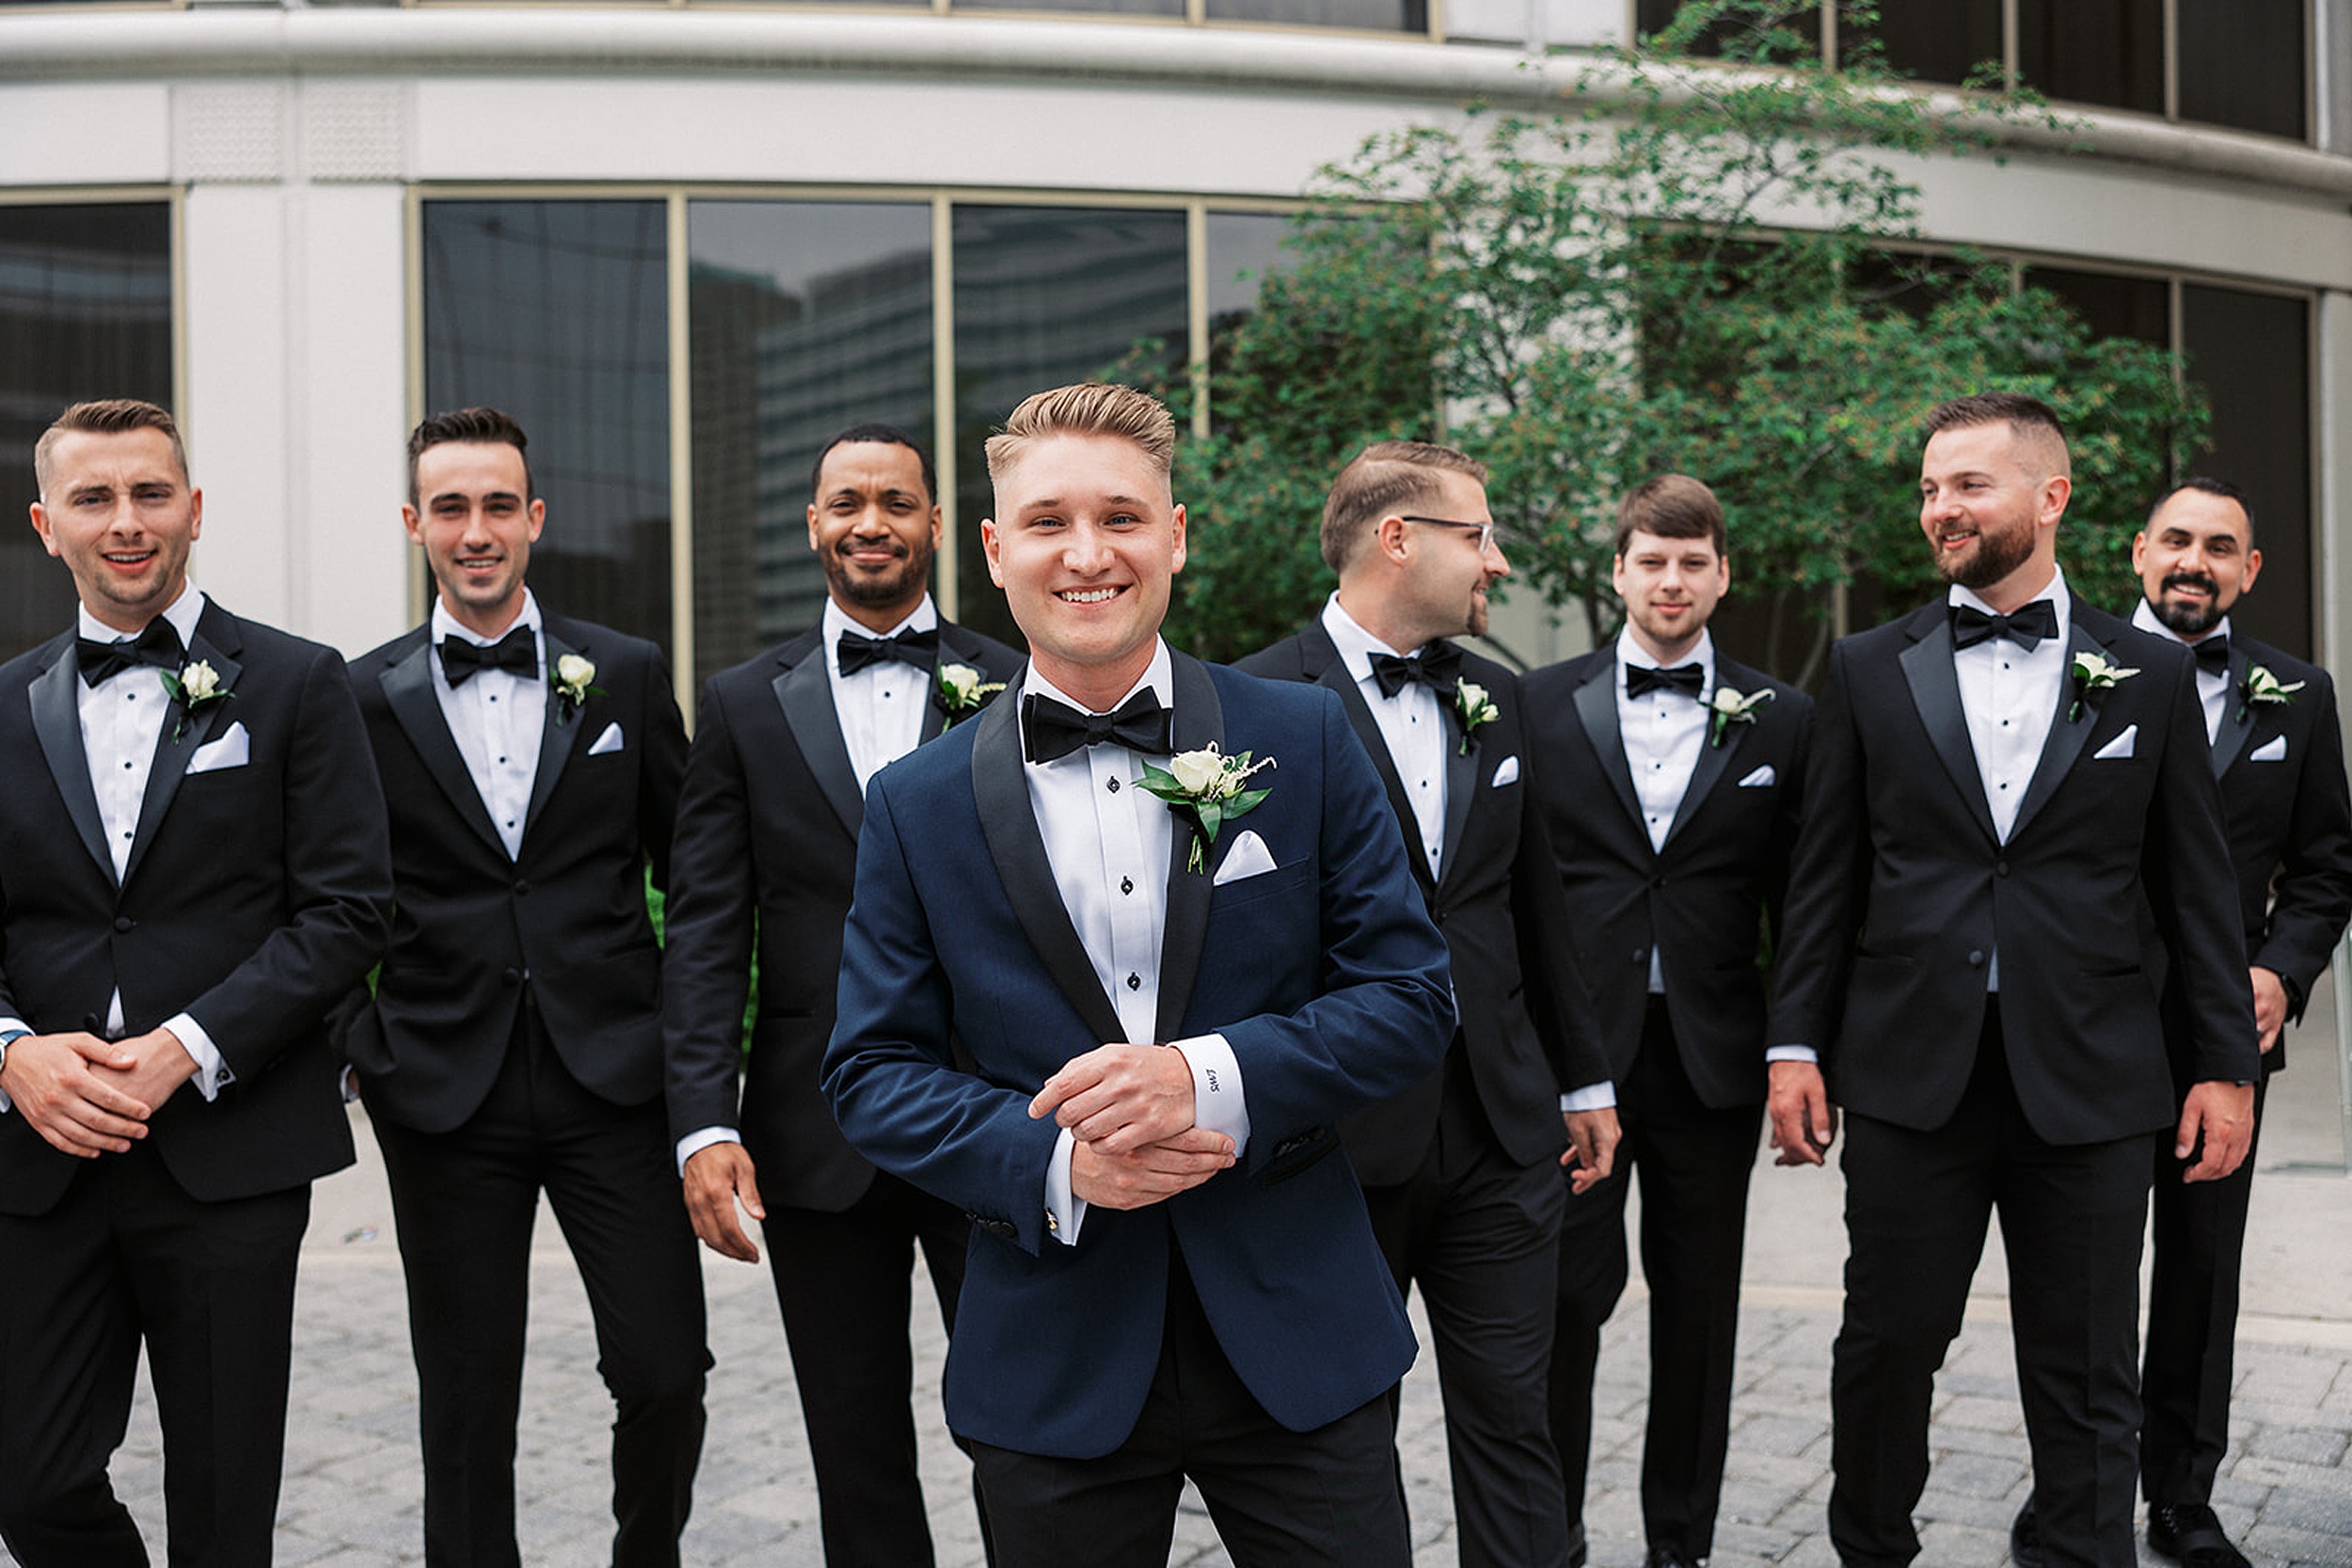 A groom adjusts his cuffs while standing on a patio with his groomsmen at a Hudson House wedding